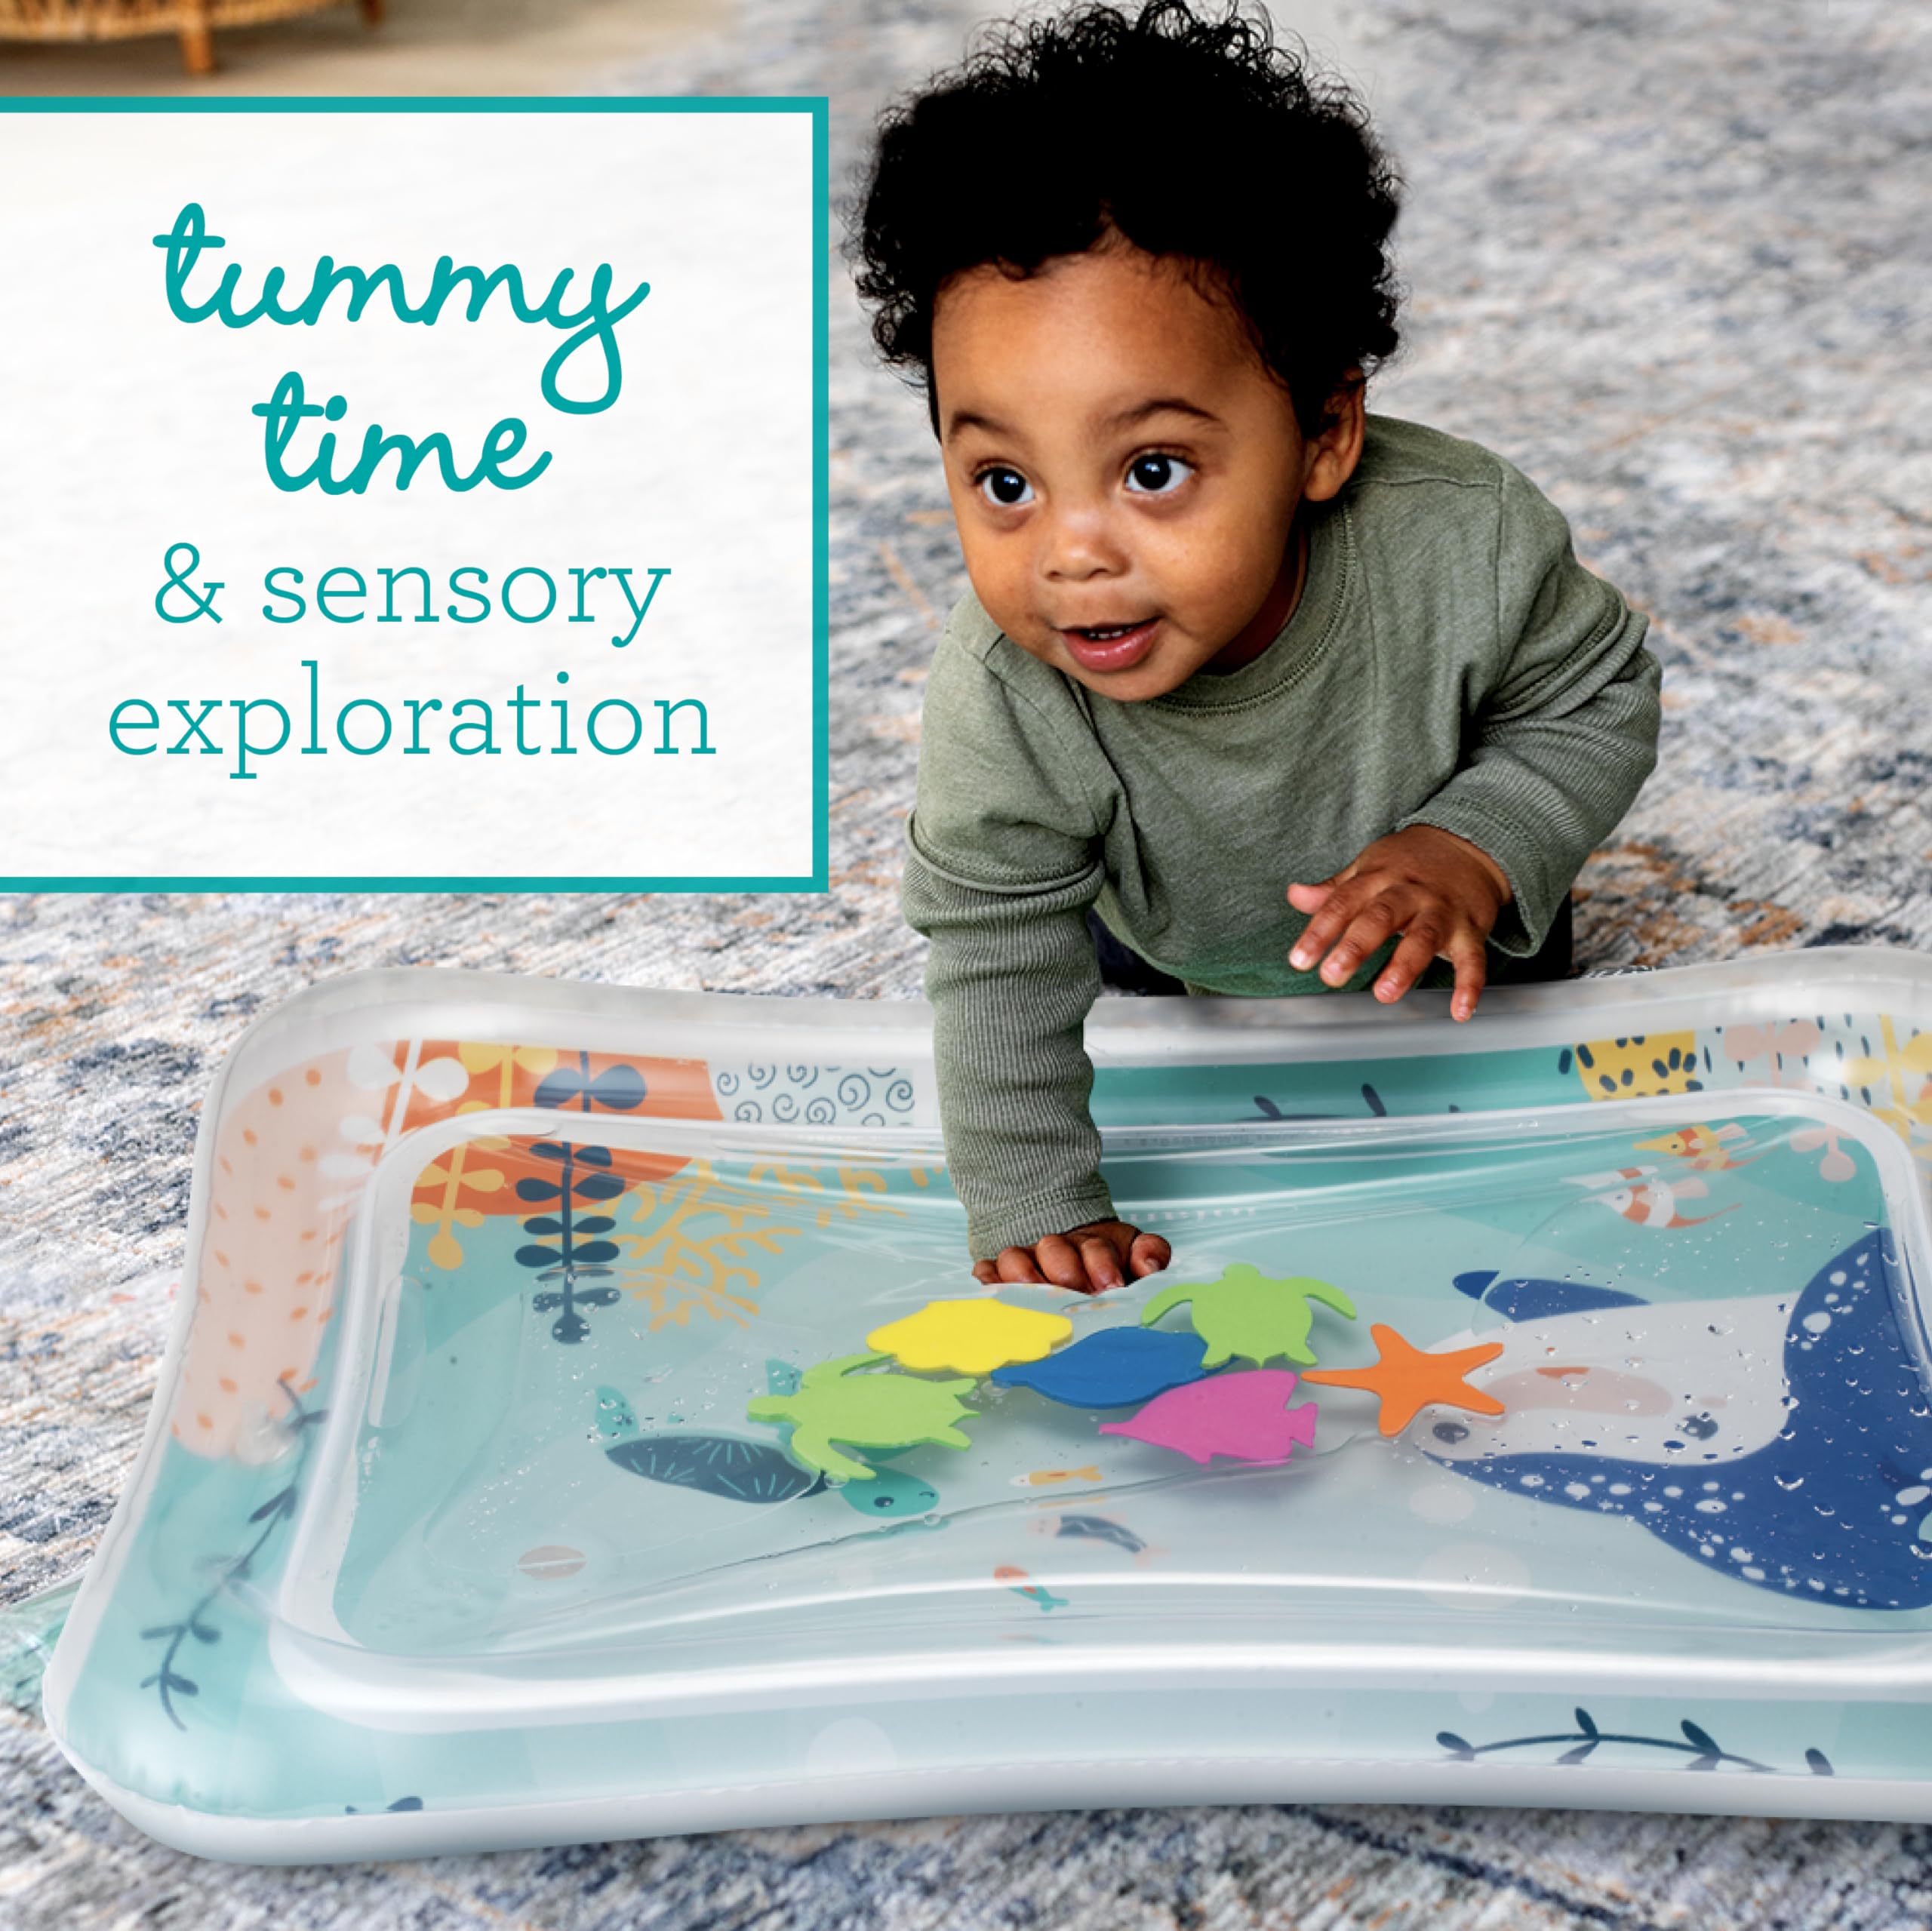 Infantino Jumbo Pat & Play Water Mat, Sea-Themed Mess-Free Water Play for Babies, Supports Tummy Time and Motor Skills Development, Multicolor, 3M+